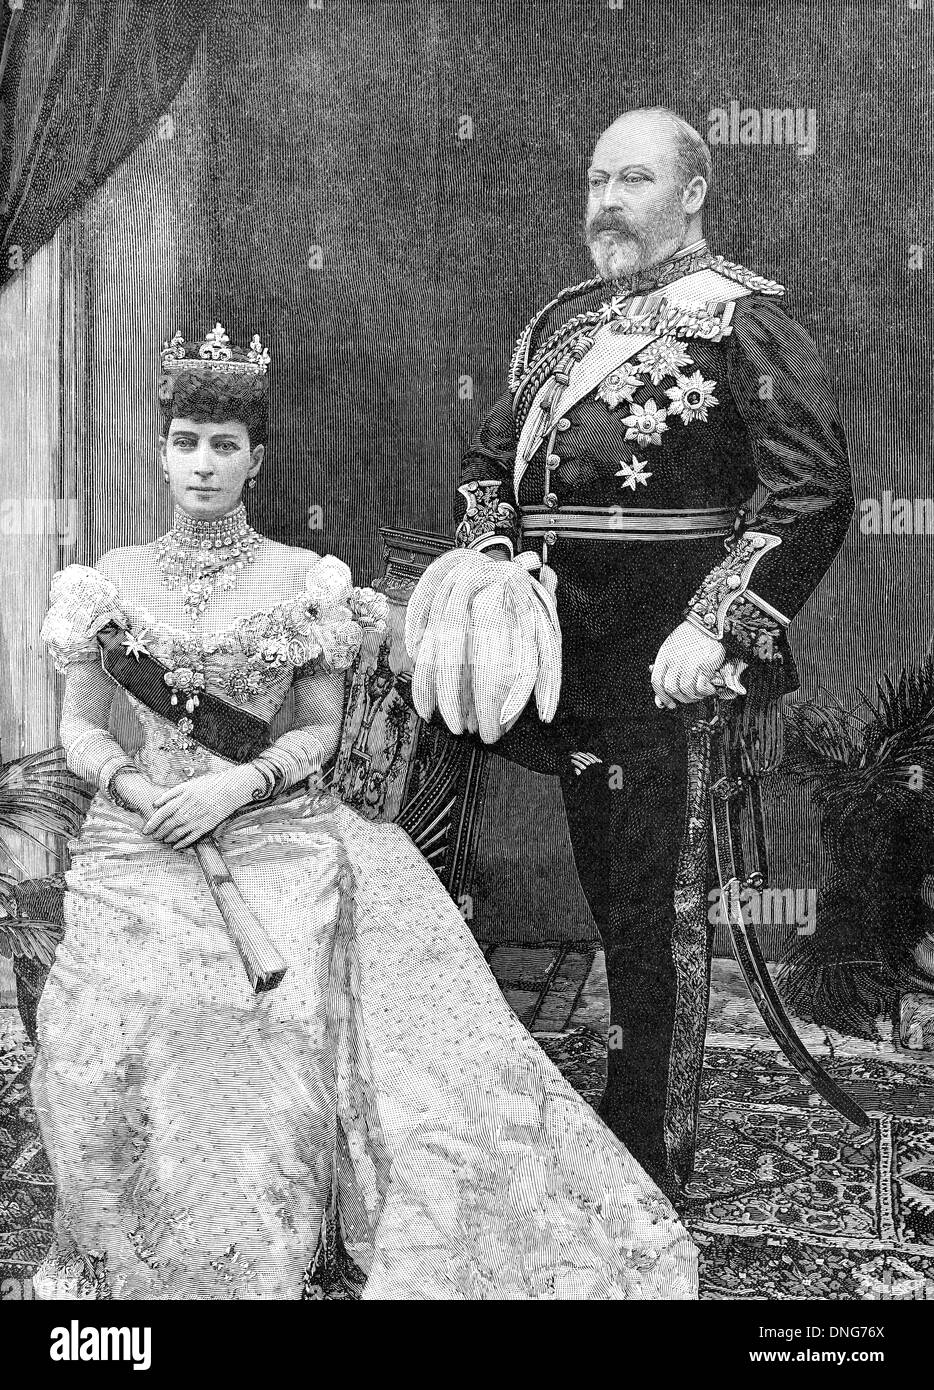 Edward VII or Albert Edward, 1841 - 1910, King of the United Kingdom and Emperor of India and his wife, Alexandra of Denmark, 18 Stock Photo